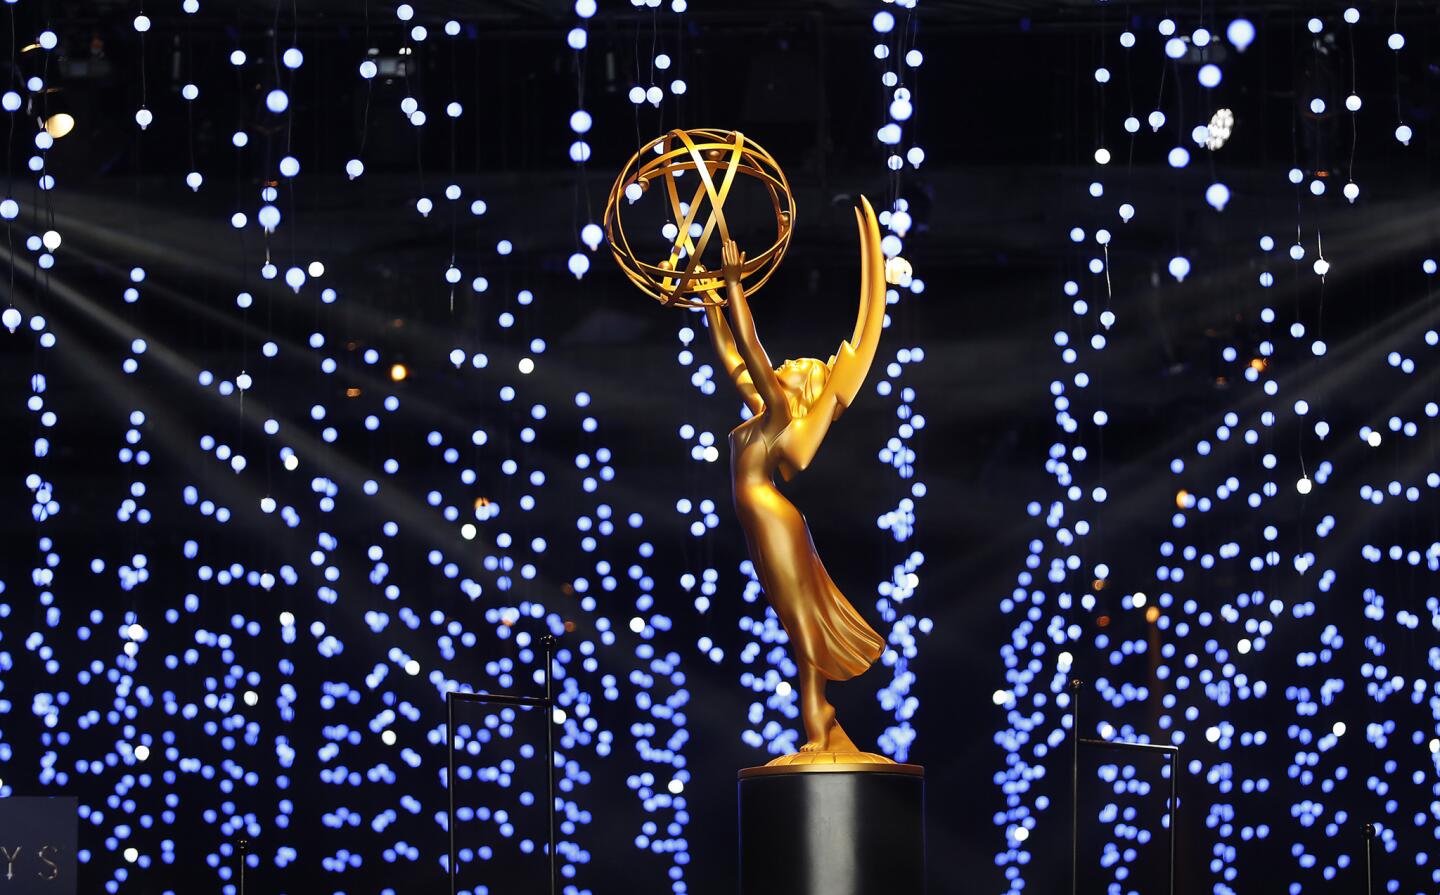 Emmy statuettes stand at attention under thousands of LED lights during the preview of the Emmys 70th Anniversary Celebration Governors Ball that will happen on Sept. 17, immediately following the awards telecast.